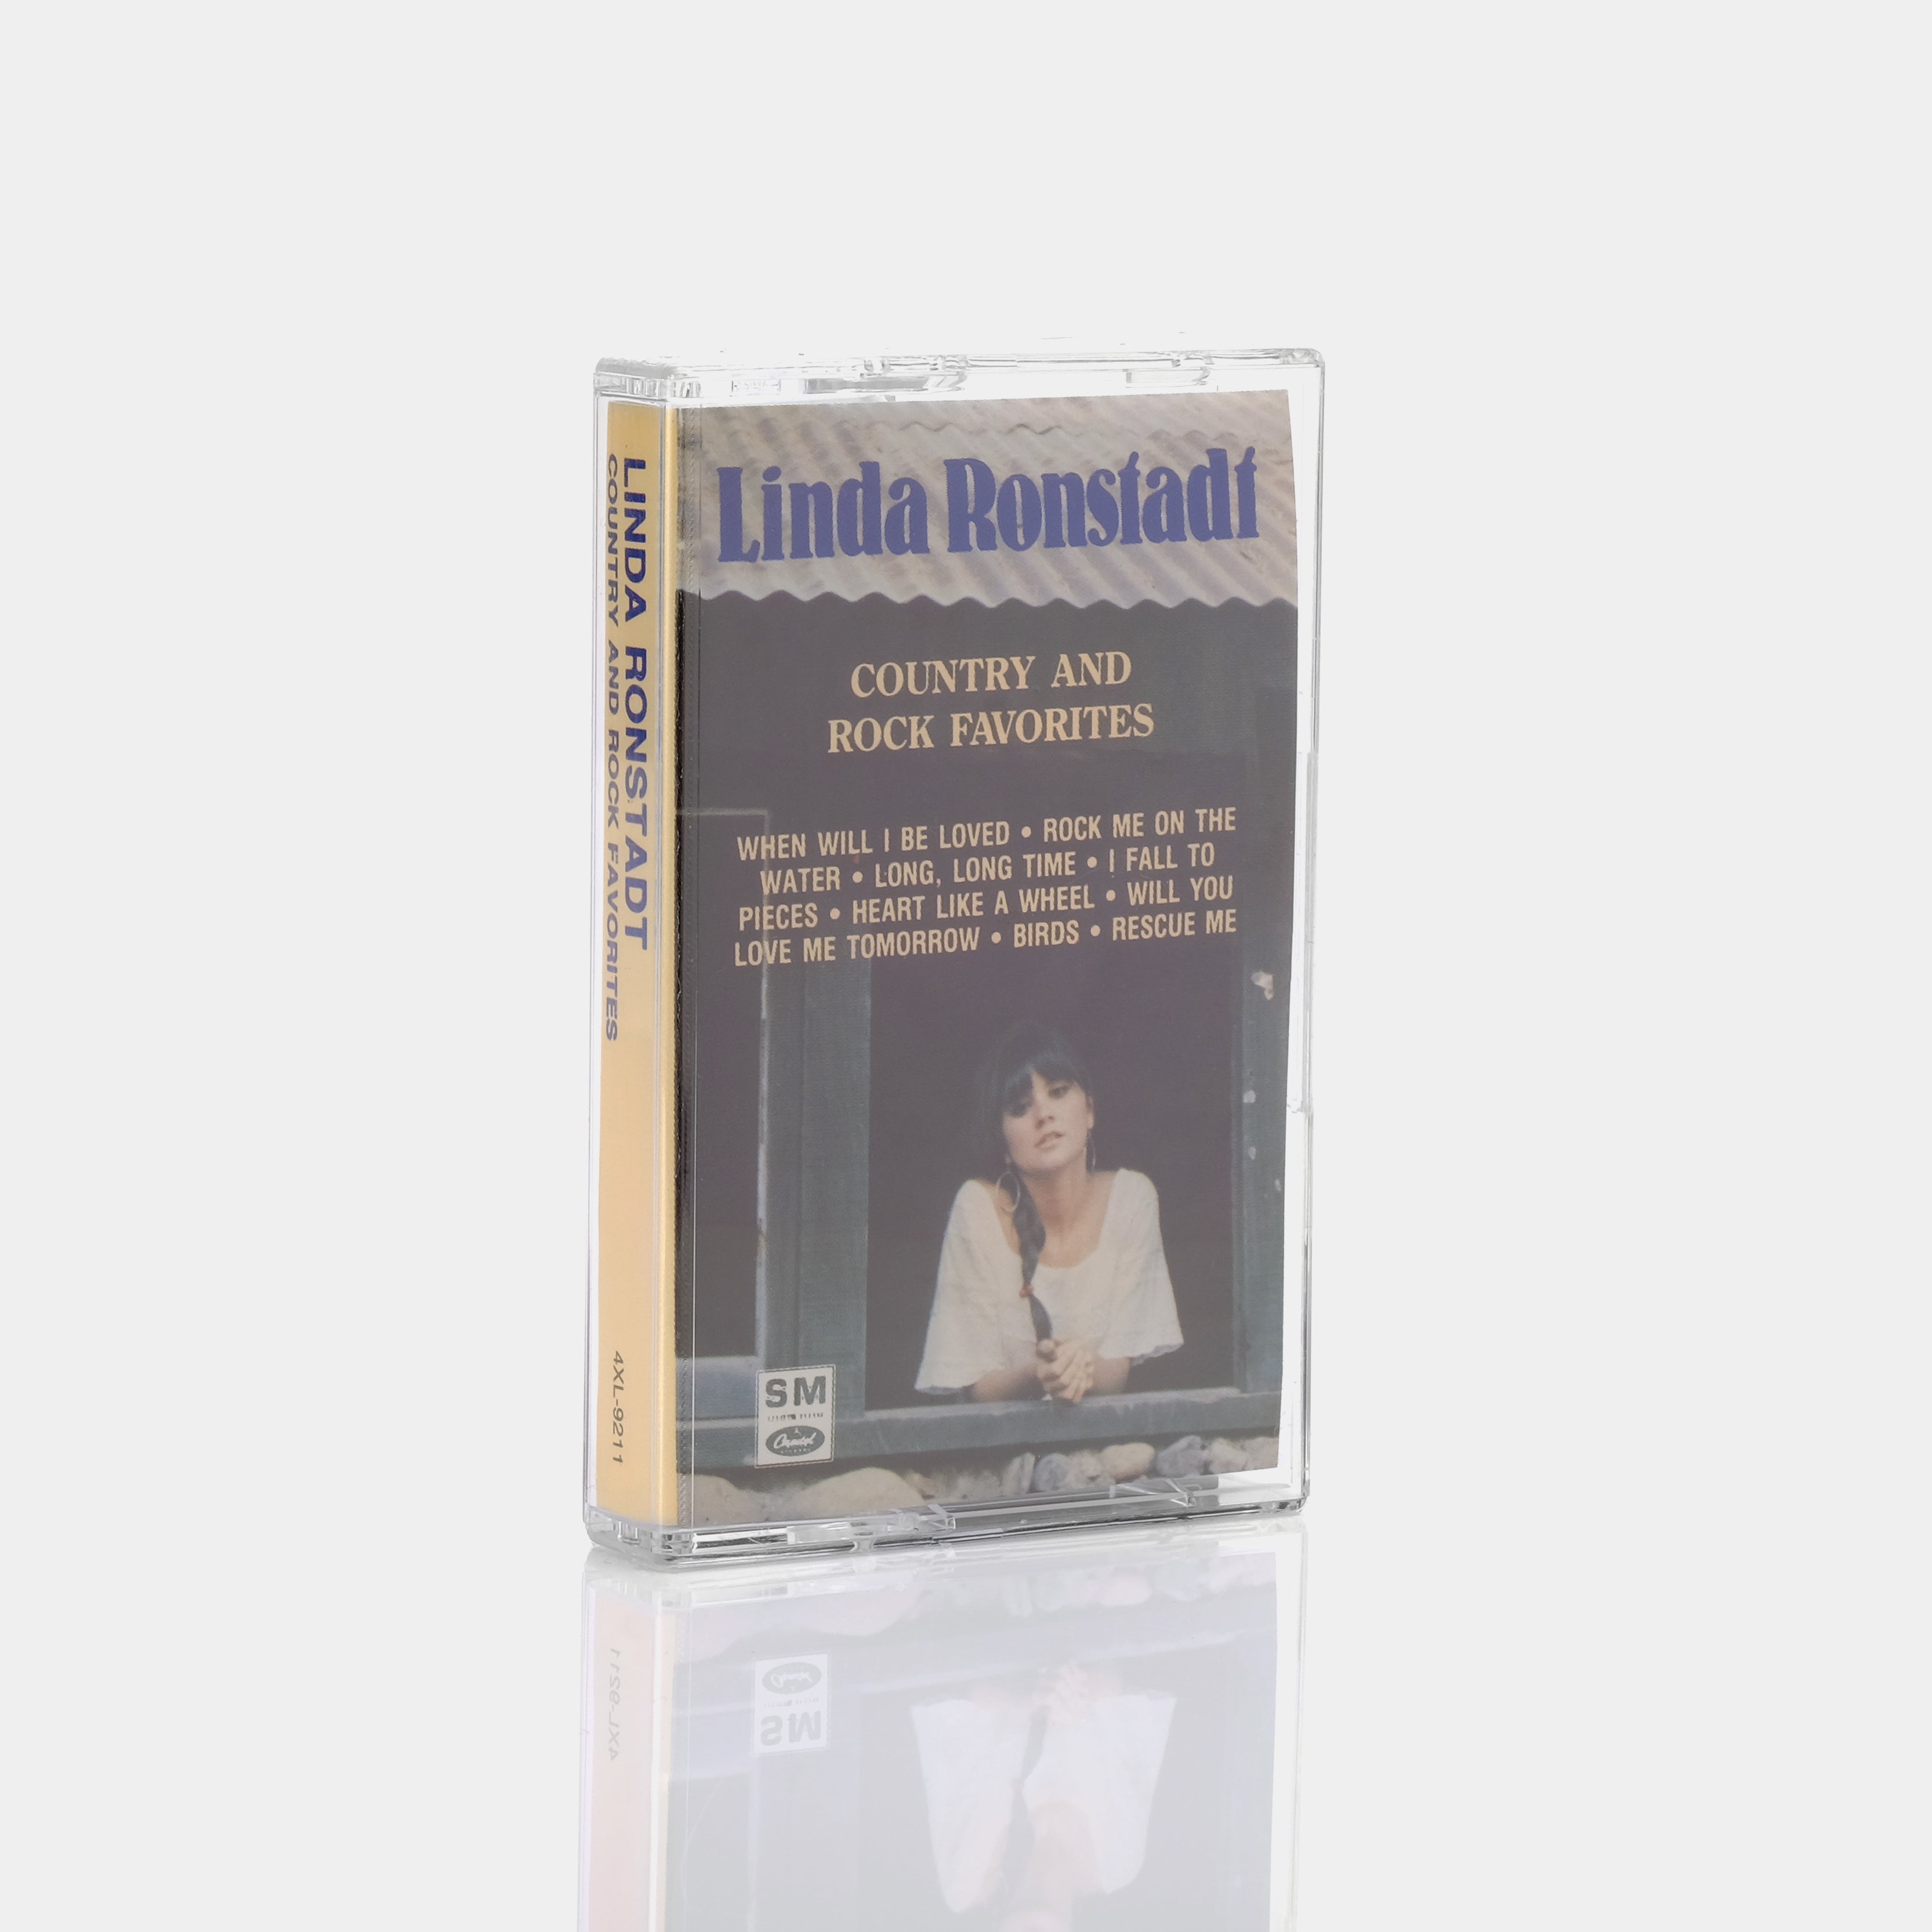 Linda Ronstadt - Country And Rock Favorites Cassette Tape